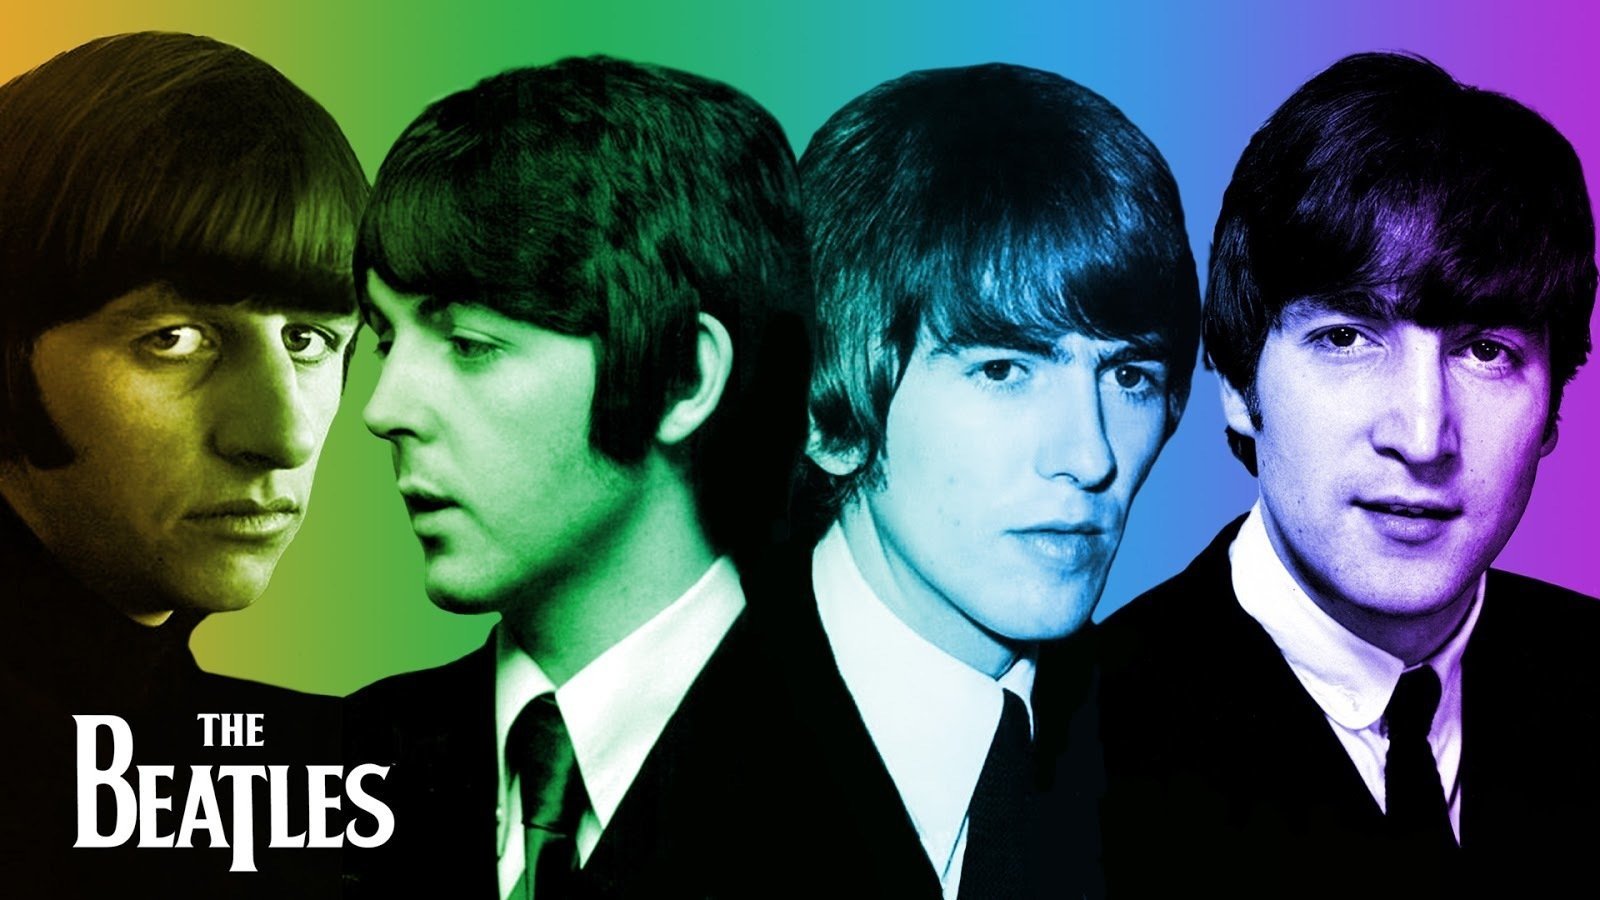 The beatles help song download